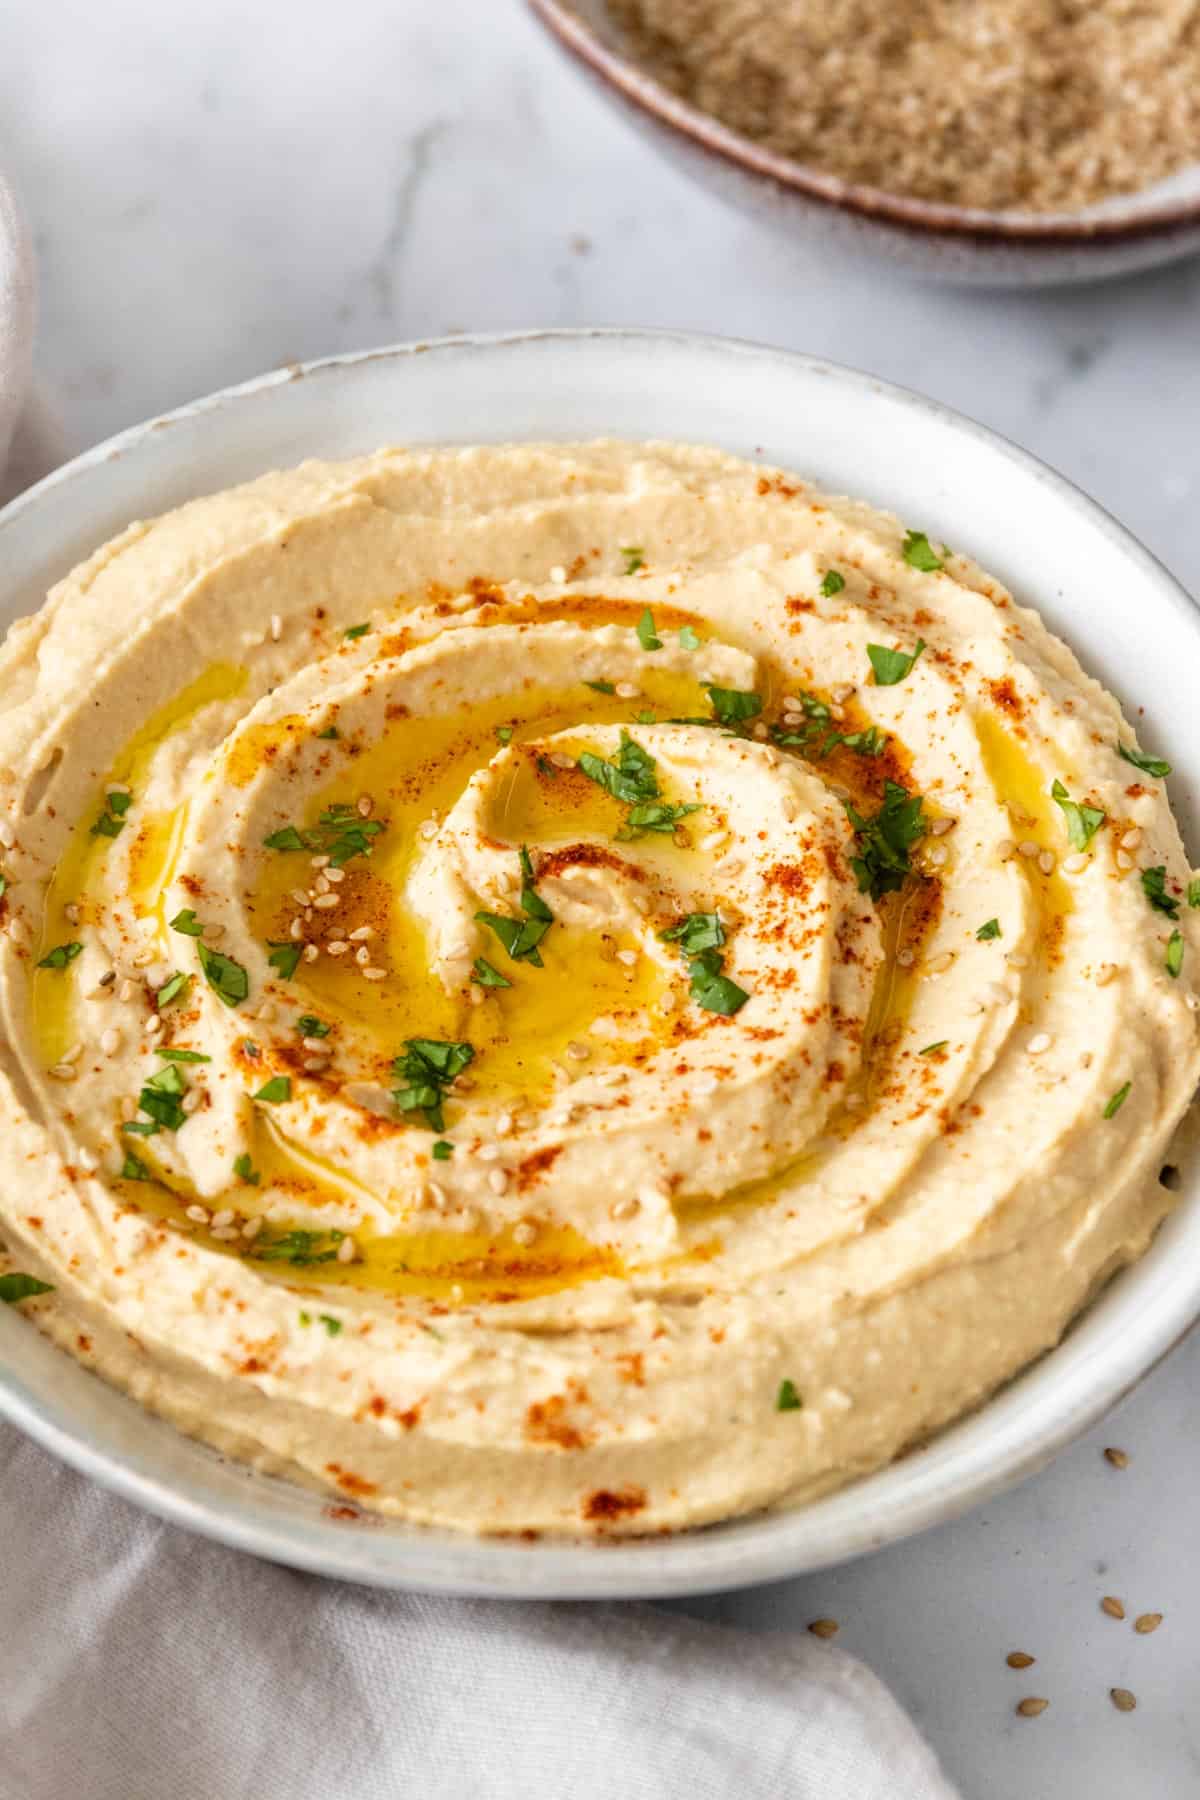 a bowl with hummus garnished with sesame seeds, olive oil, paprika, and chopped parsley